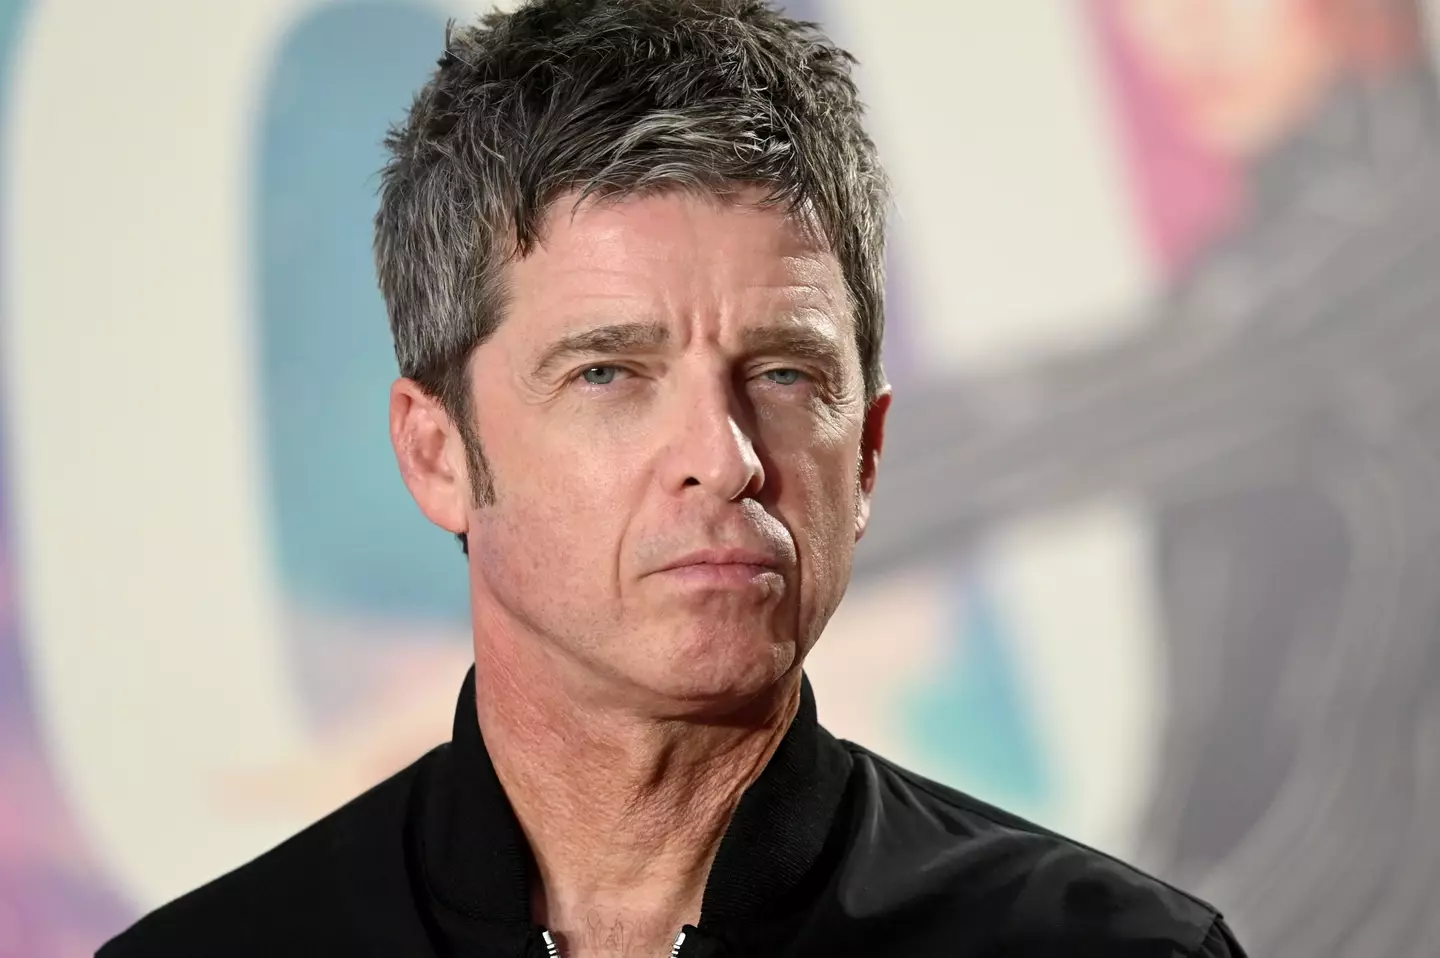 'Wonderwall' hit-maker Noel Gallagher has received a six-month ban from driving despite never gets his license.